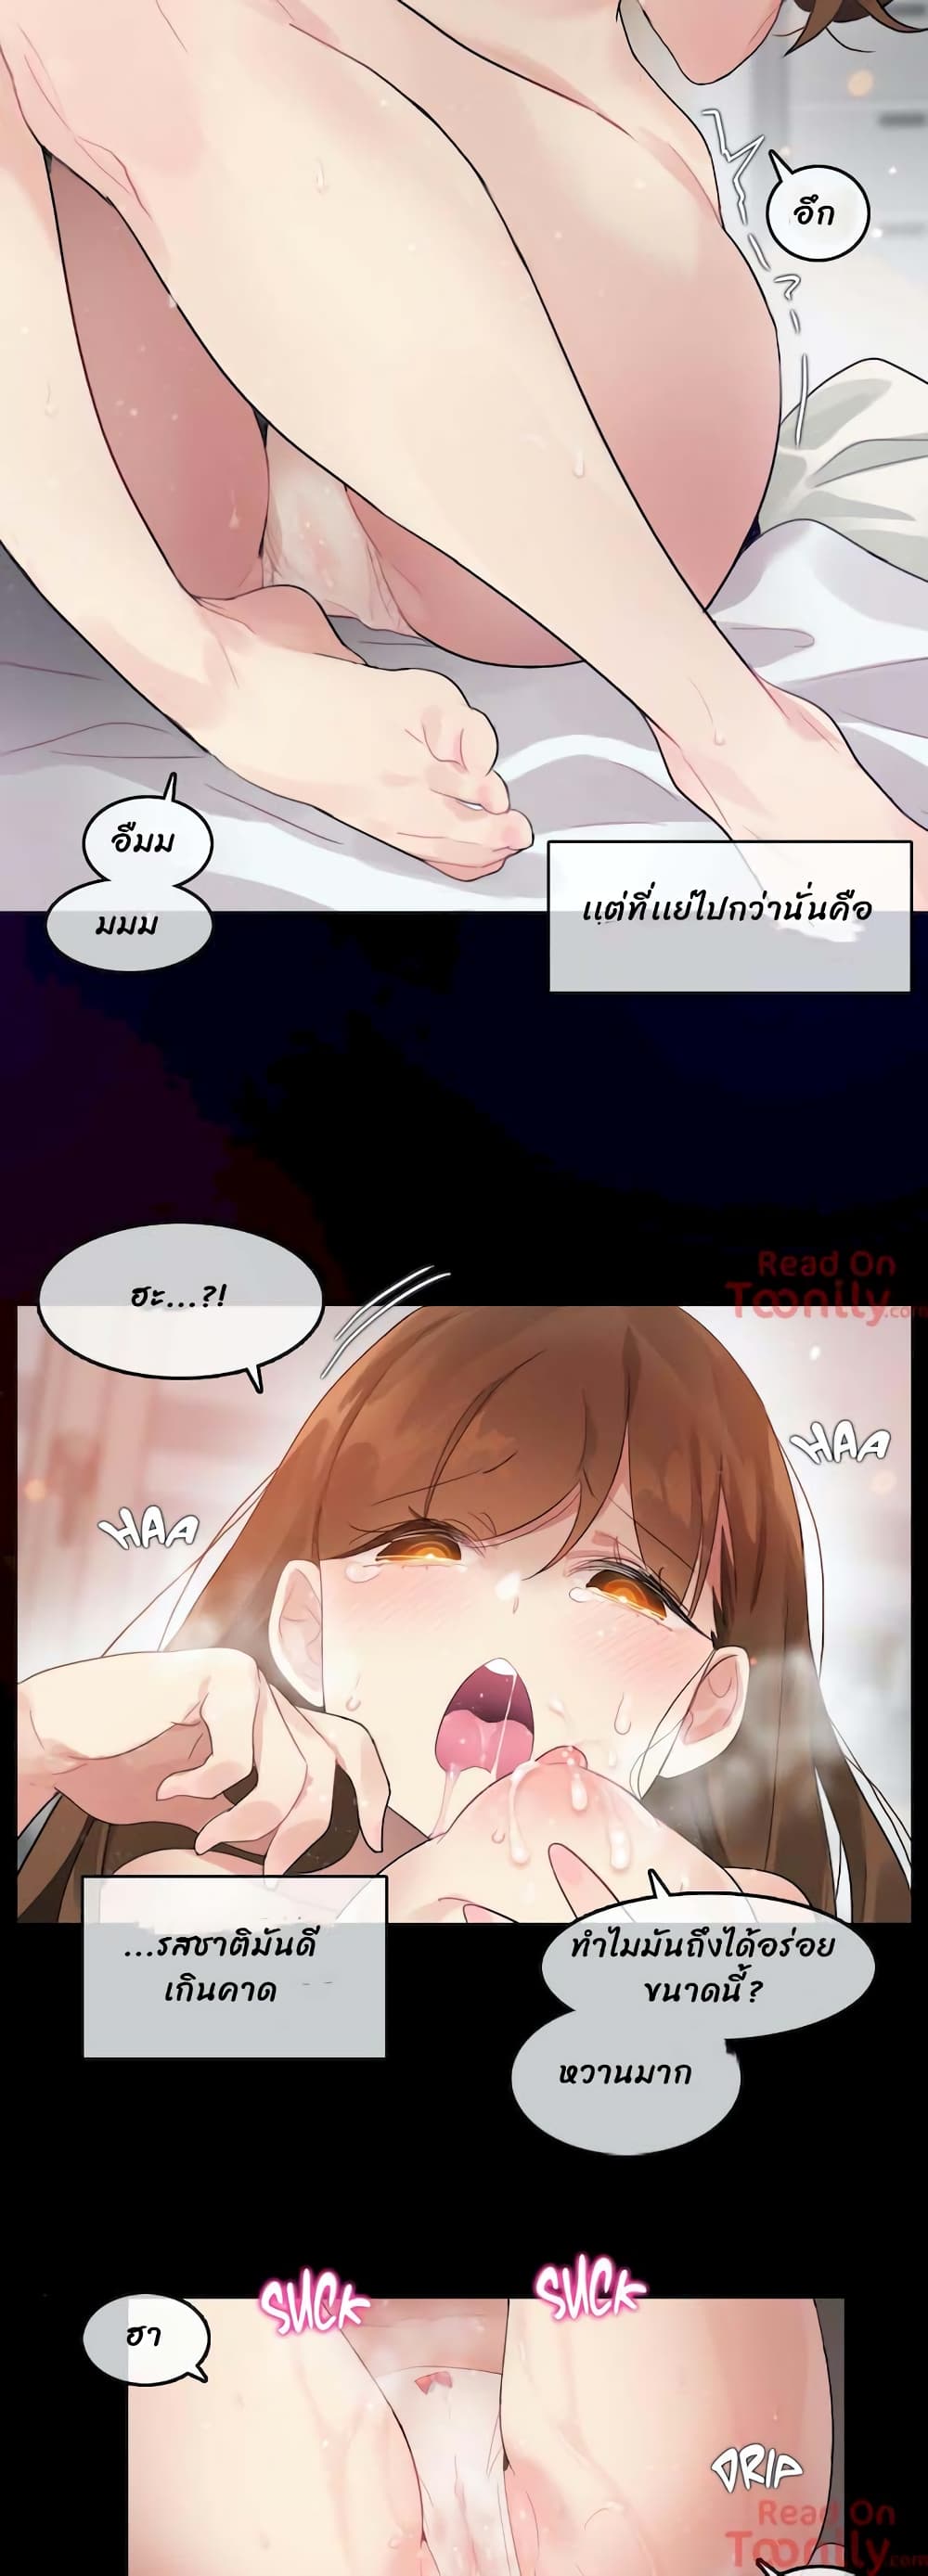 A Pervert’s Daily Life 74 08